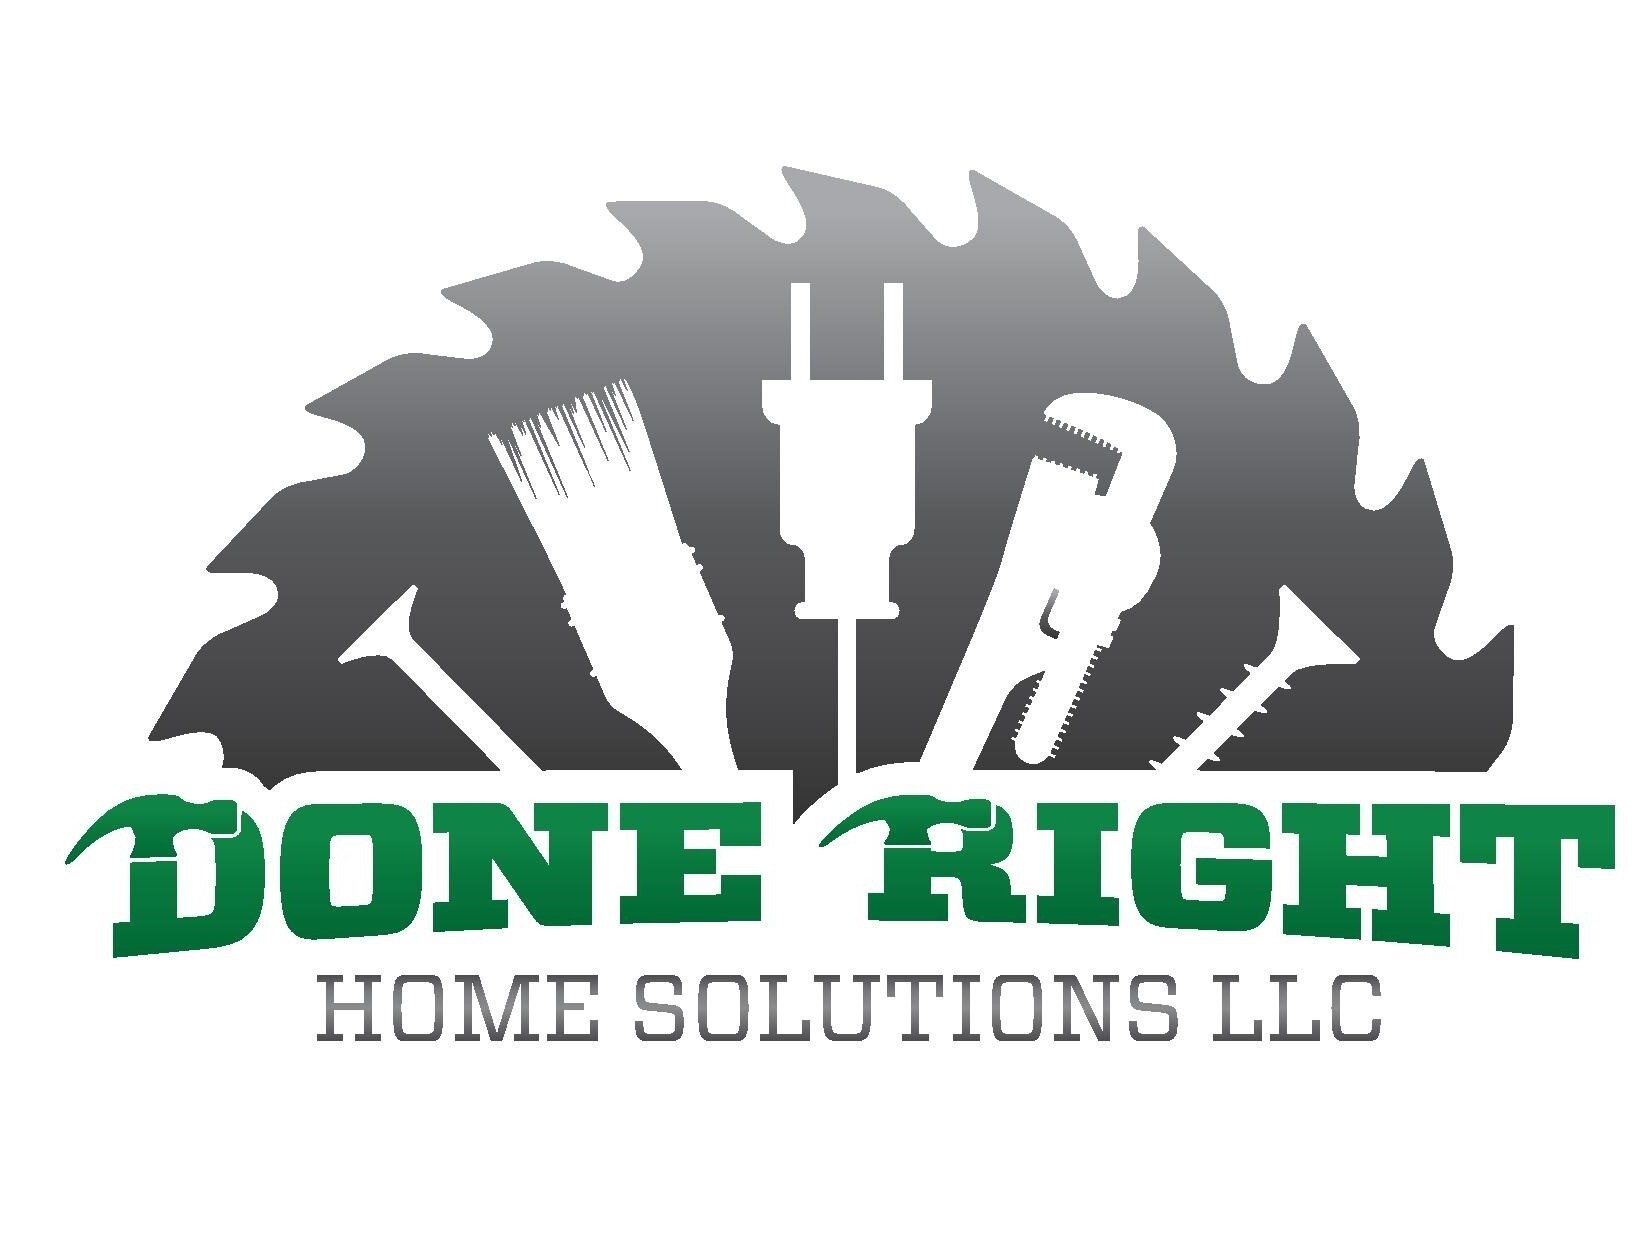 Done Right Home Solutions